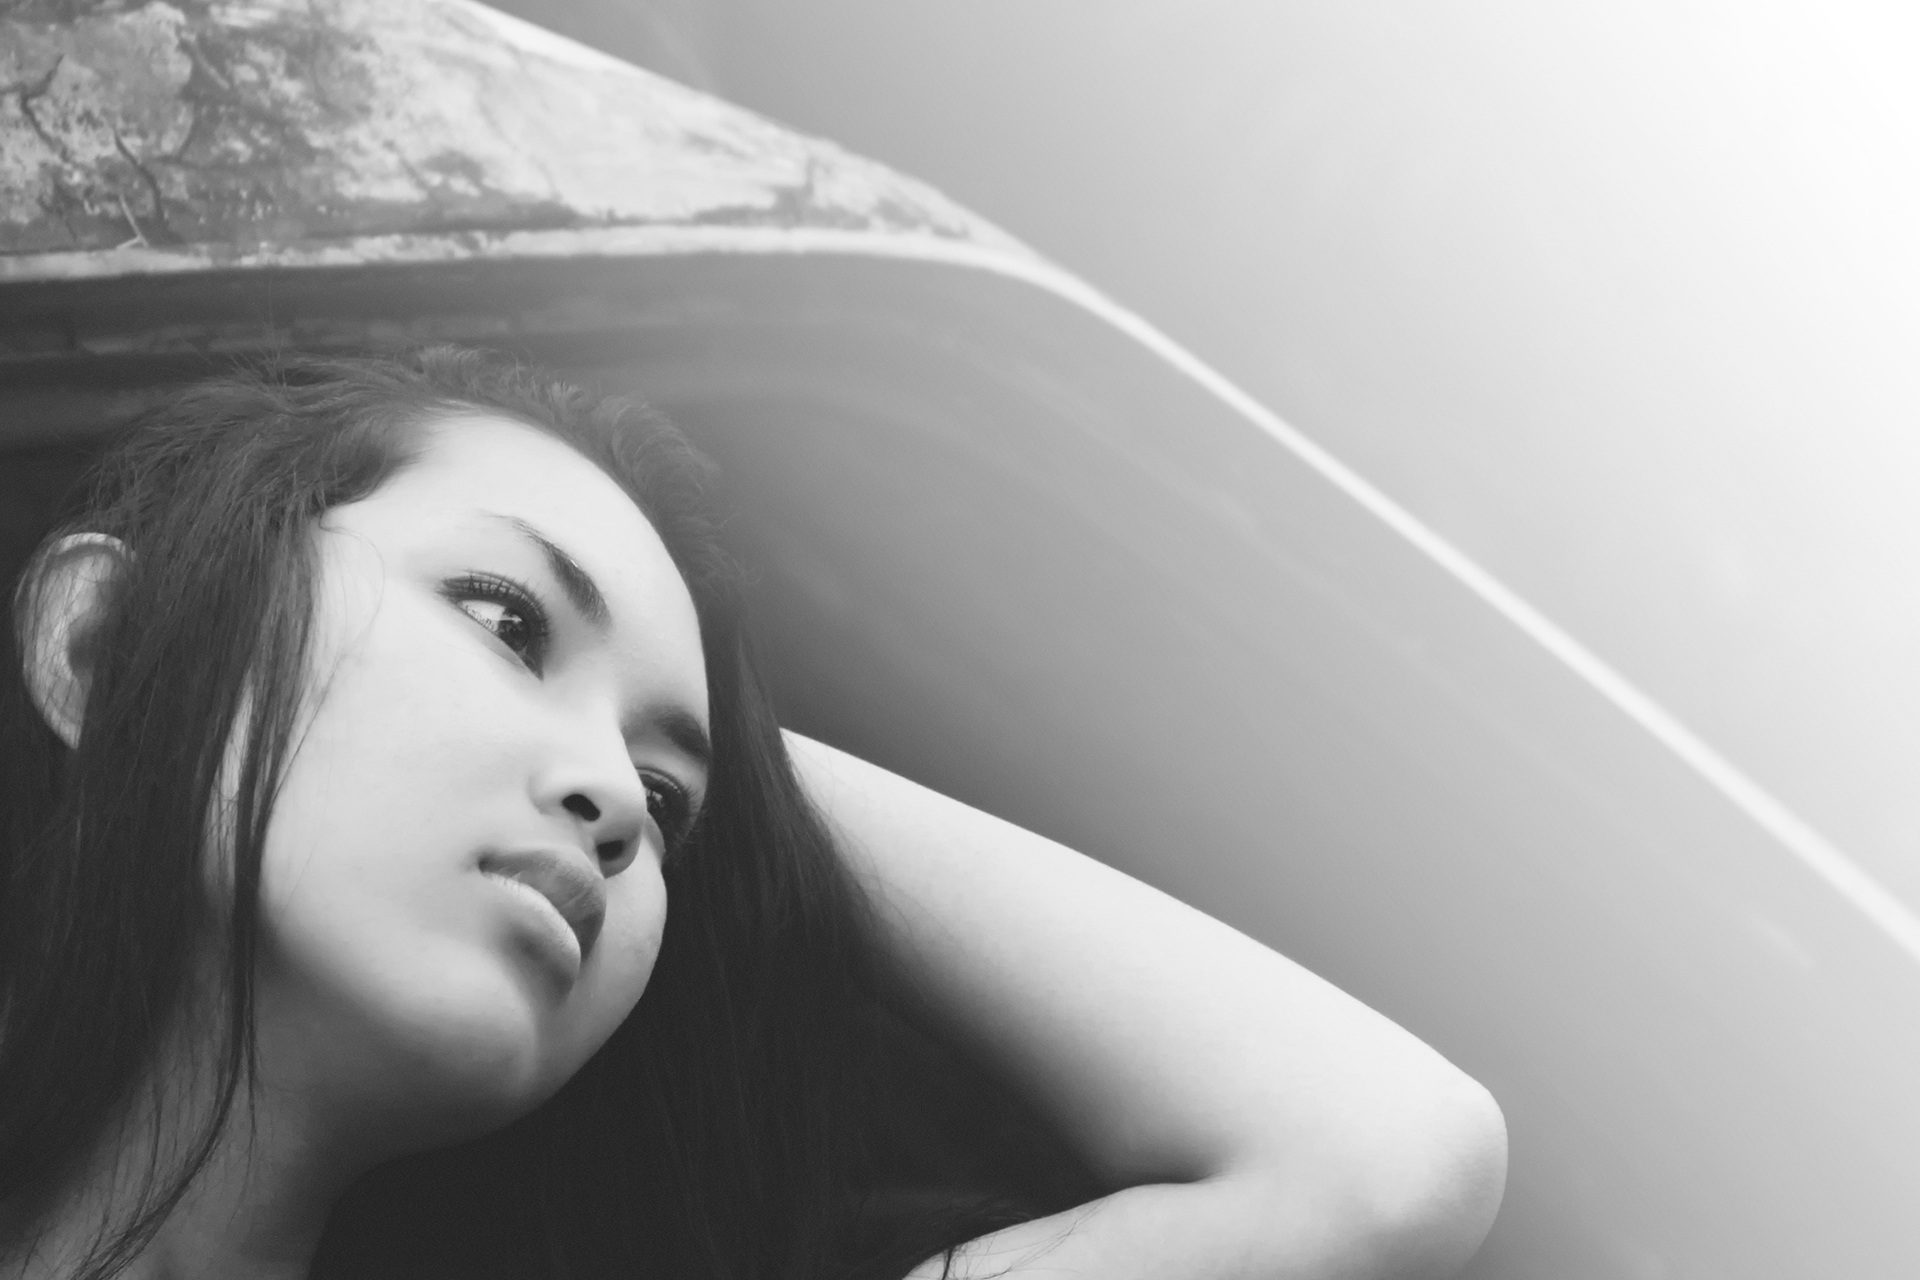 Asian Girl Black And White Portrait Free Image Download